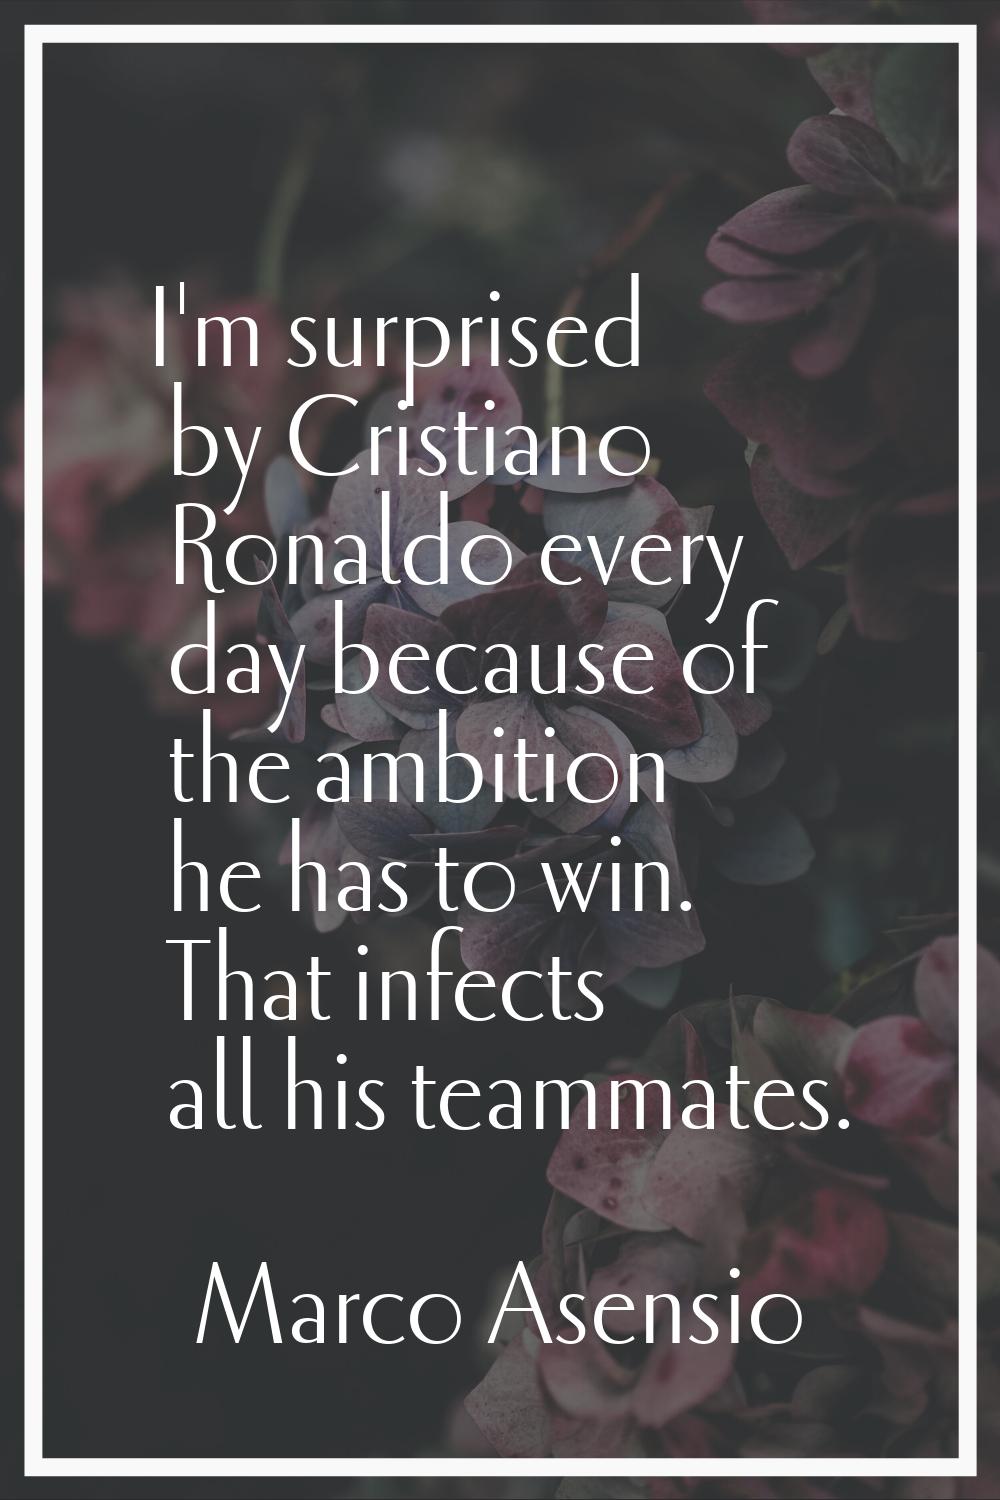 I'm surprised by Cristiano Ronaldo every day because of the ambition he has to win. That infects al